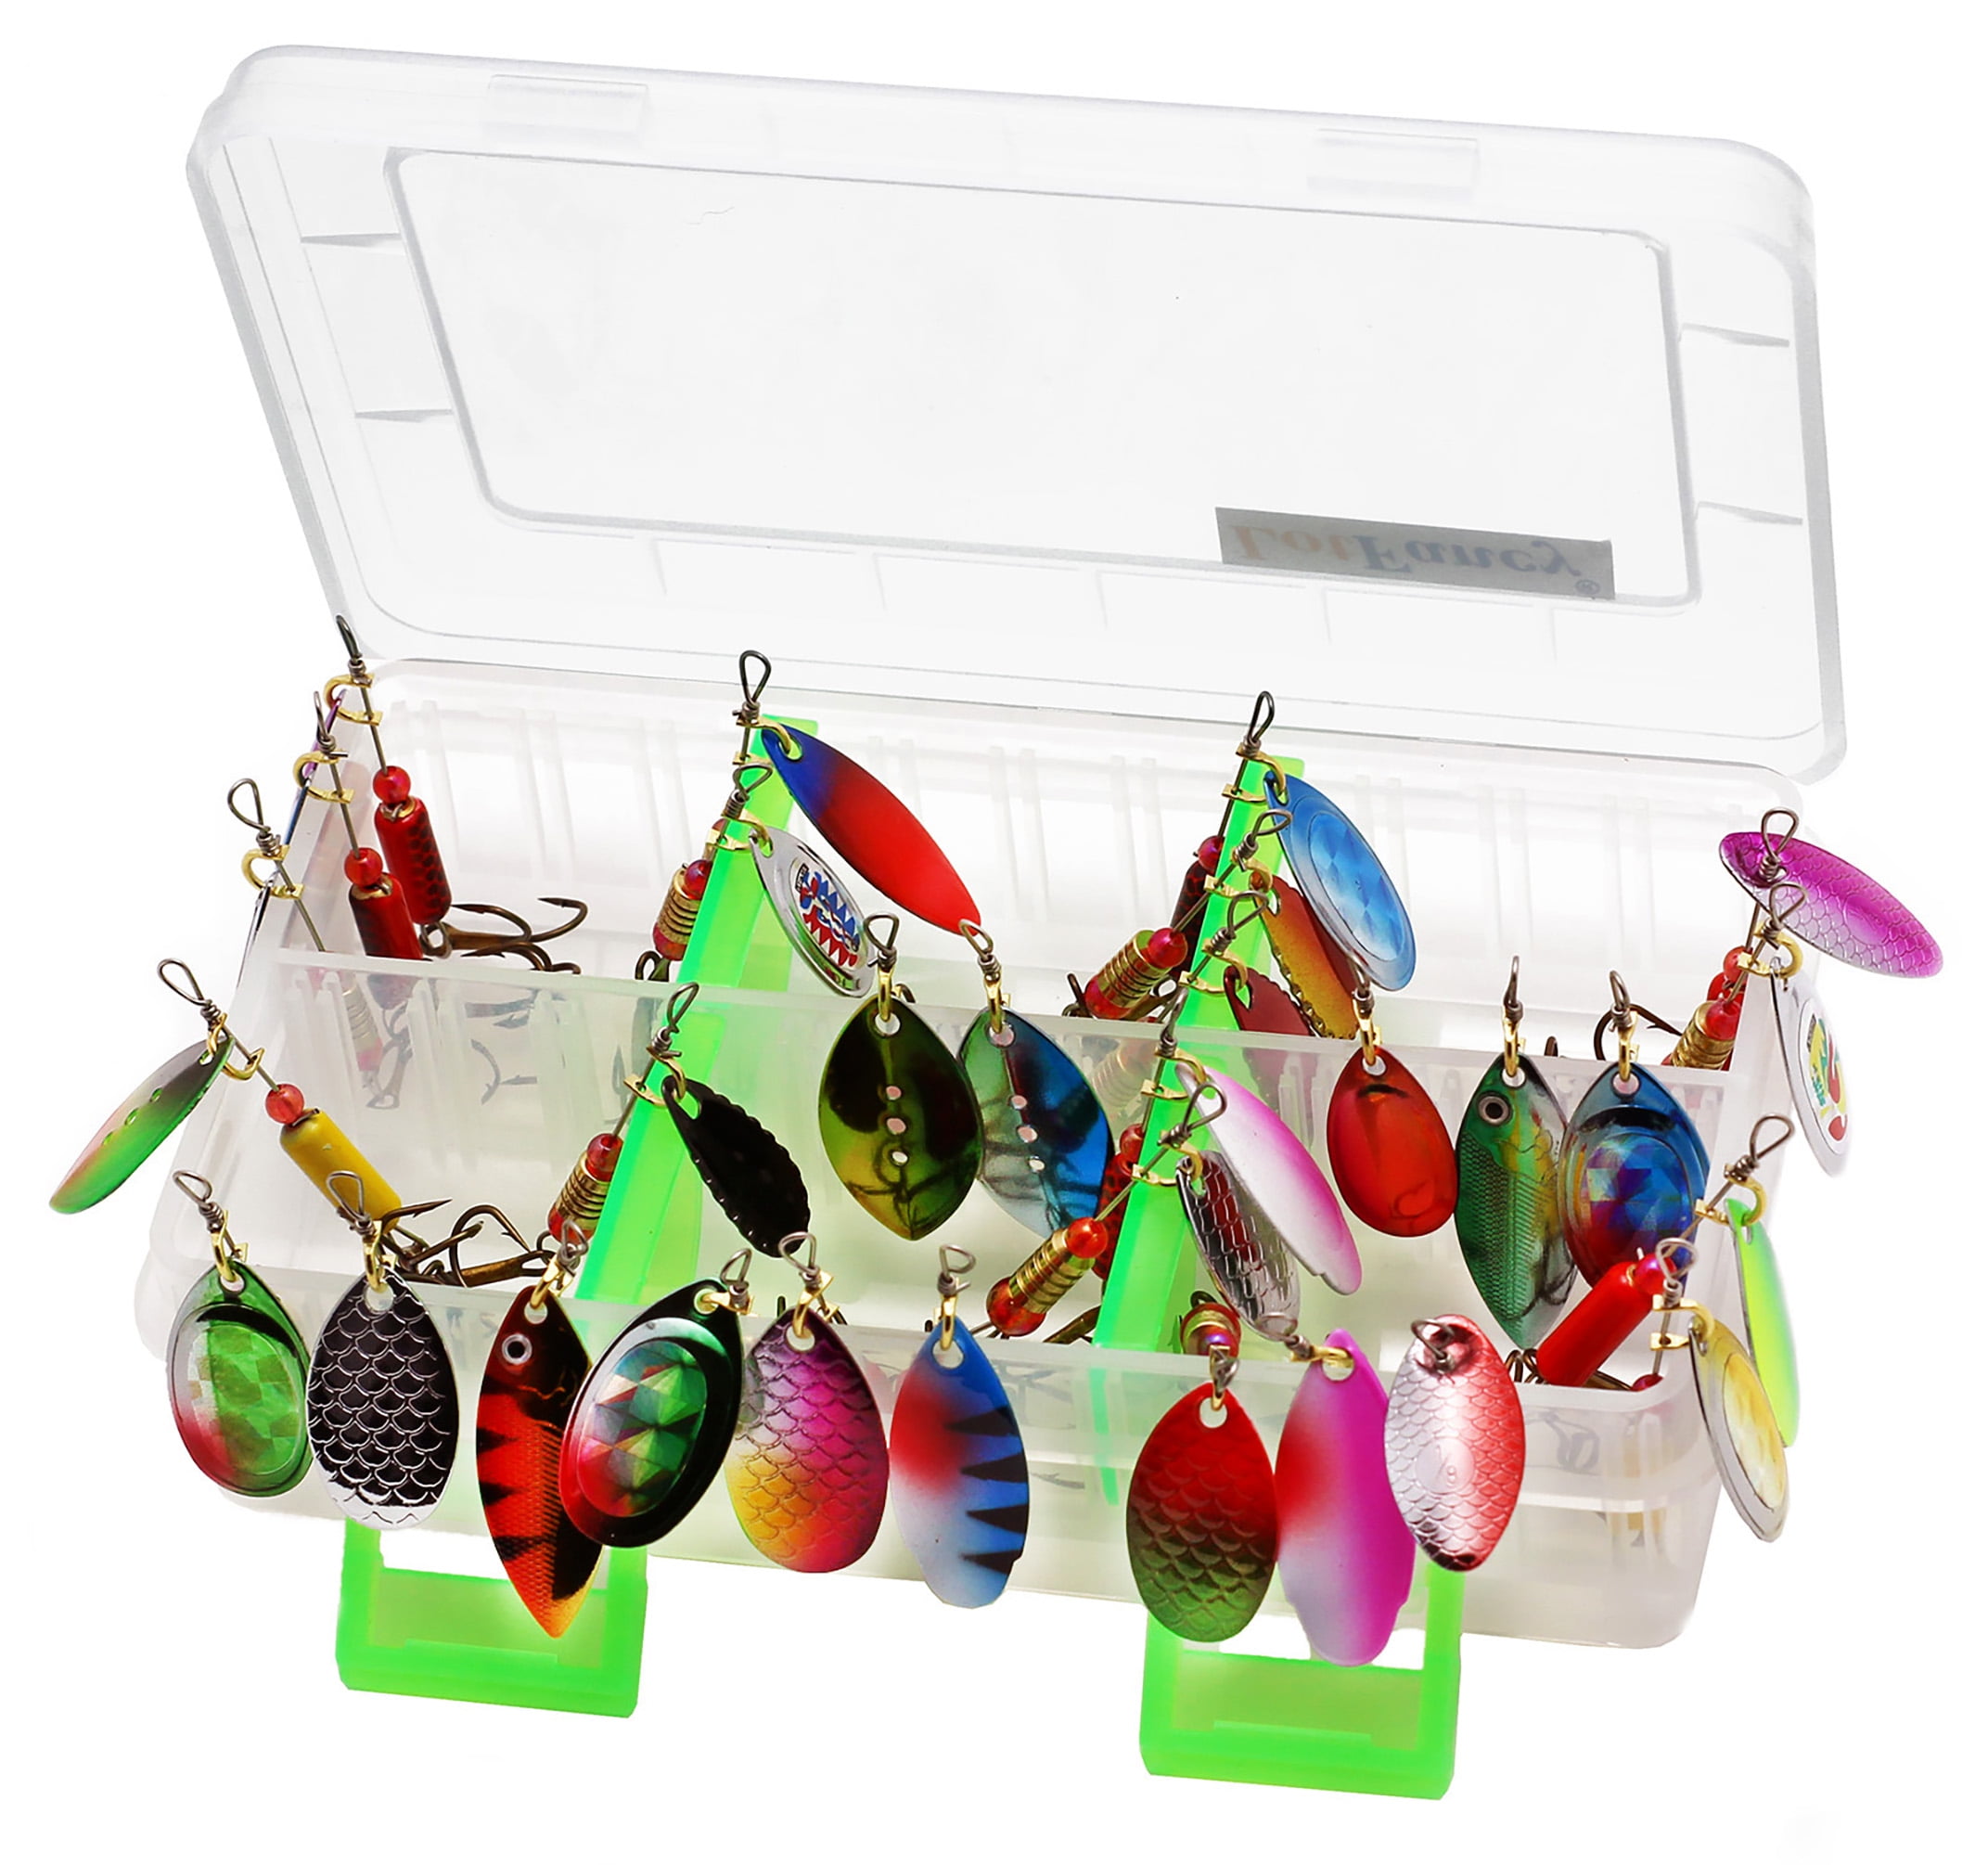 LotFancy Hard Metal Fishing Lures, 30 Spinner Baits with Tackle